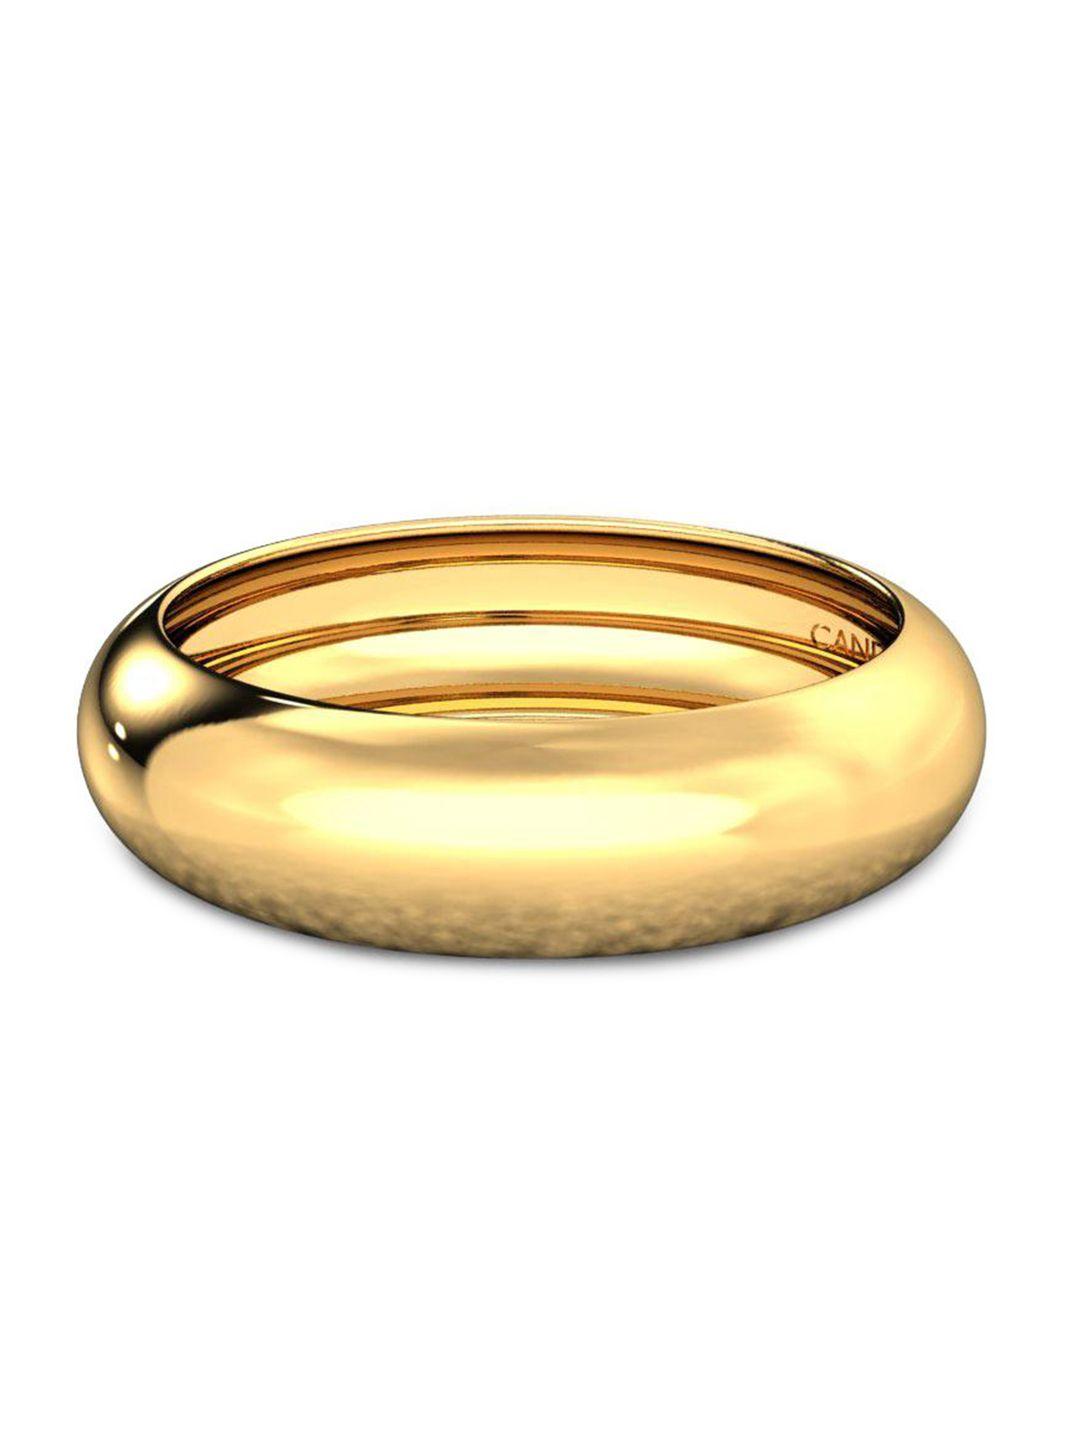 candere-a-kalyan-jewellers-company-18kt-gold-ring-1.85gm